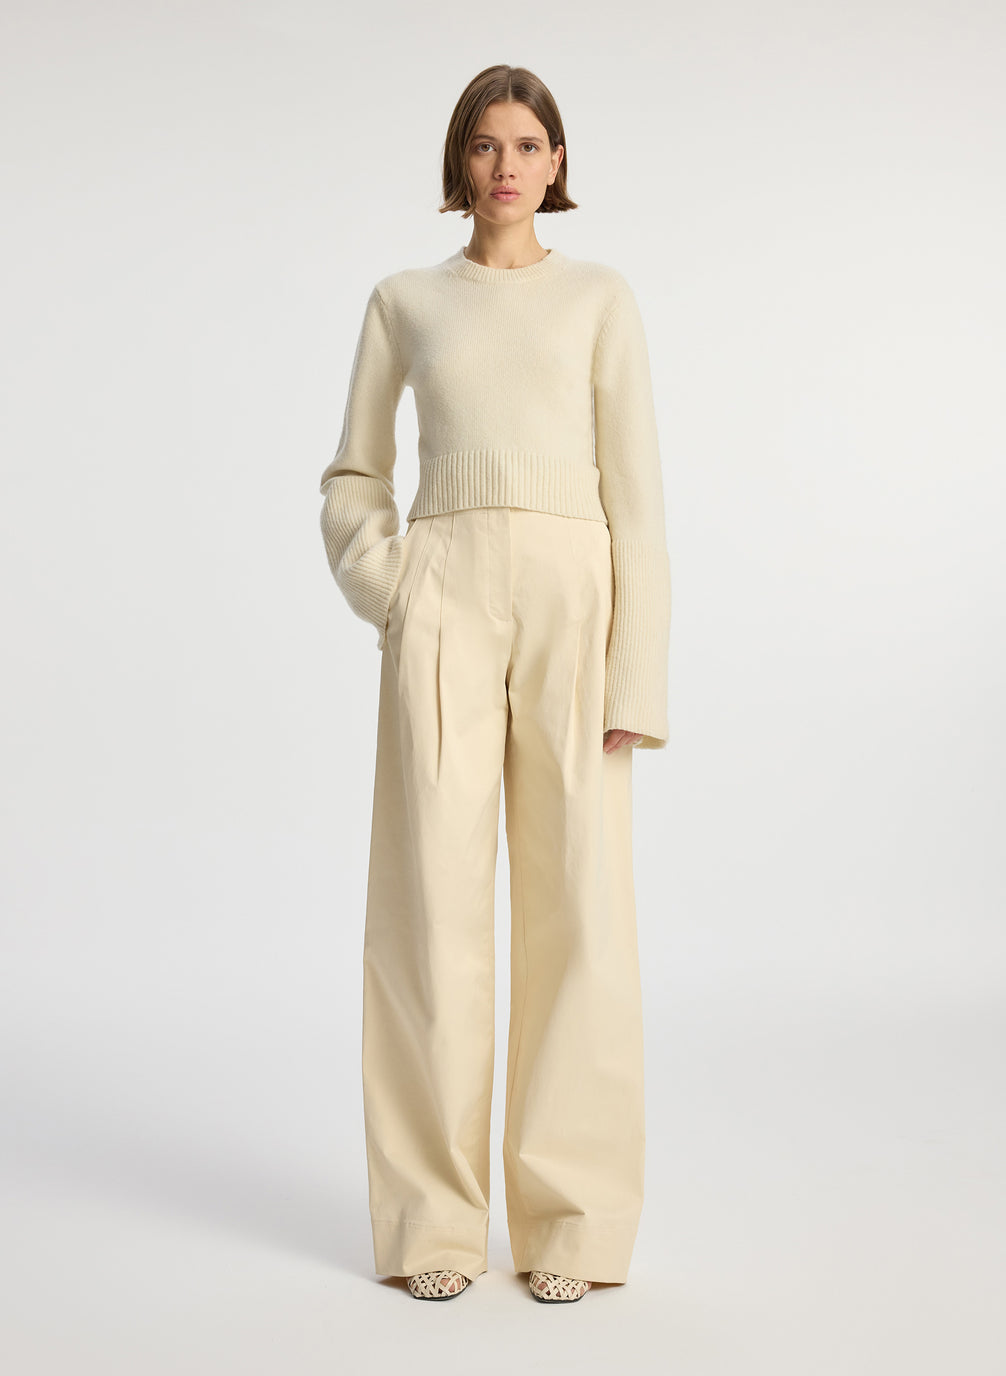 front view of woman wearing cream sweater and beige pants